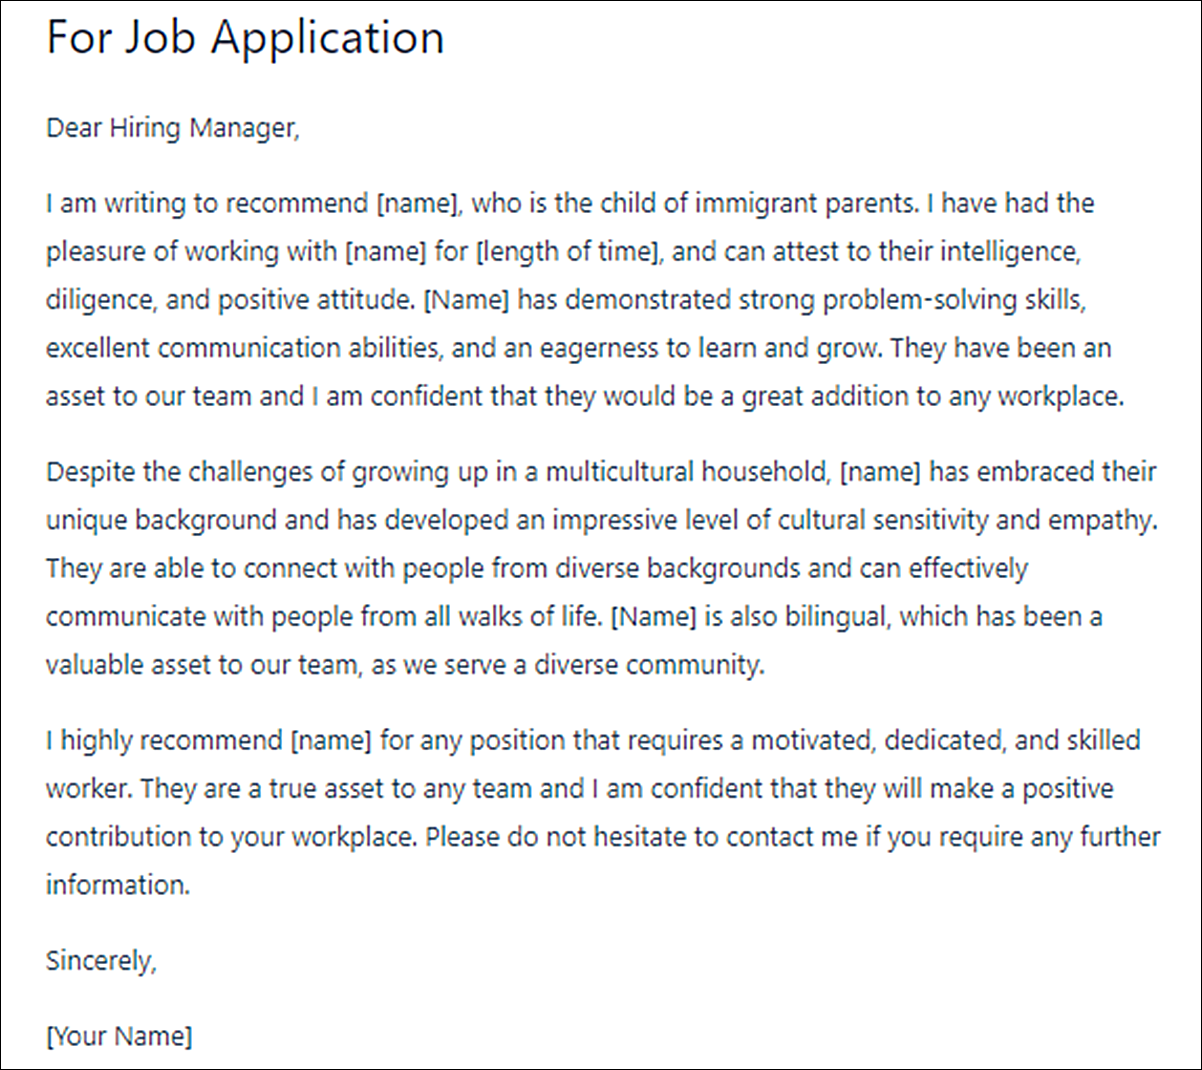 Letter of Recommendation Template for Child of Immigrant Parents